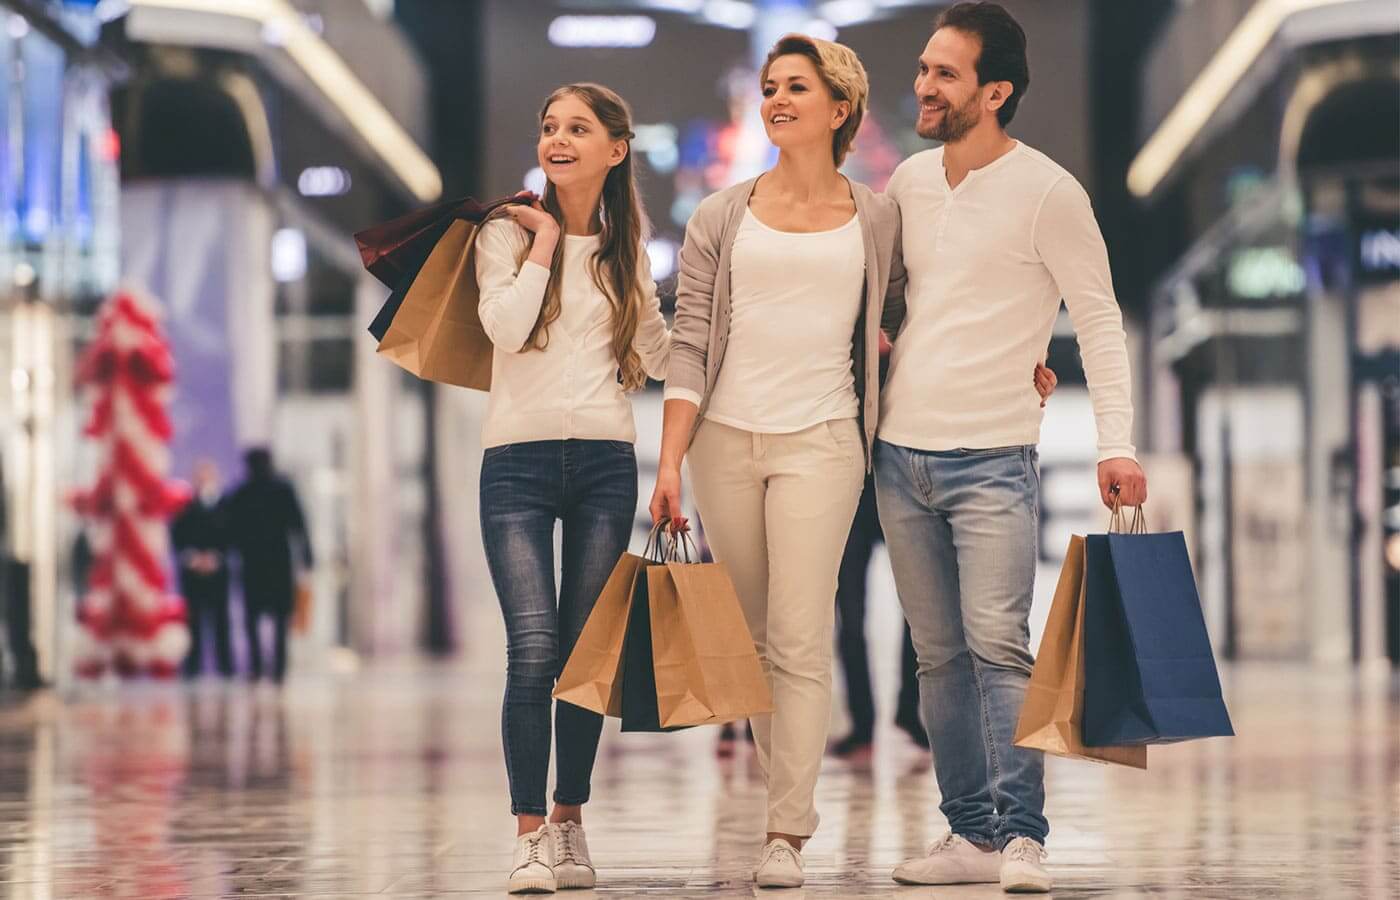 A young family walking though a shopping mall with shopping bags in hand